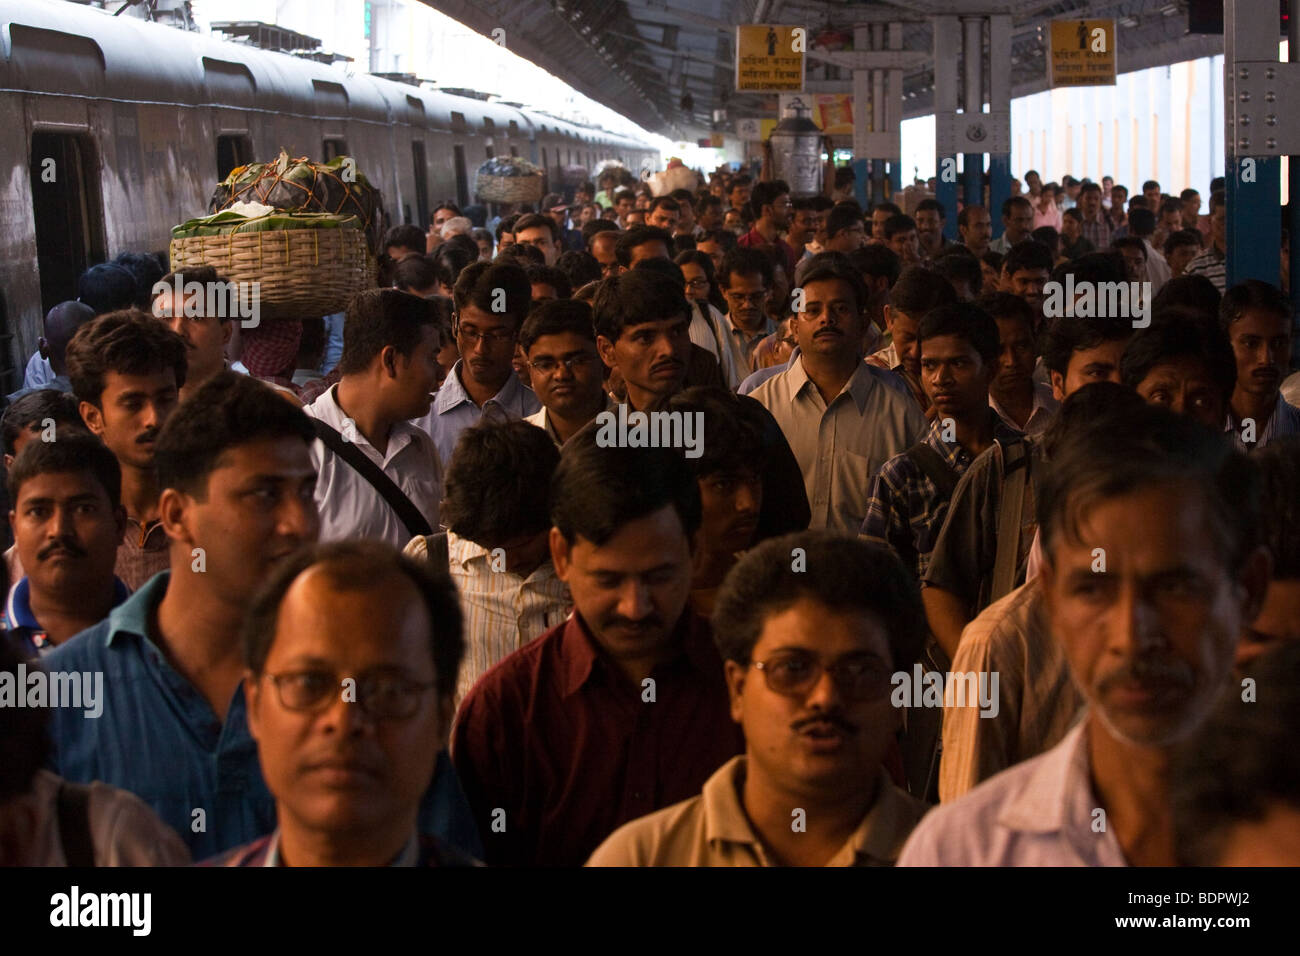 People Crowd the Platform to leave the Train at Sealdah Railway Station in Calcutta India Stock Photo